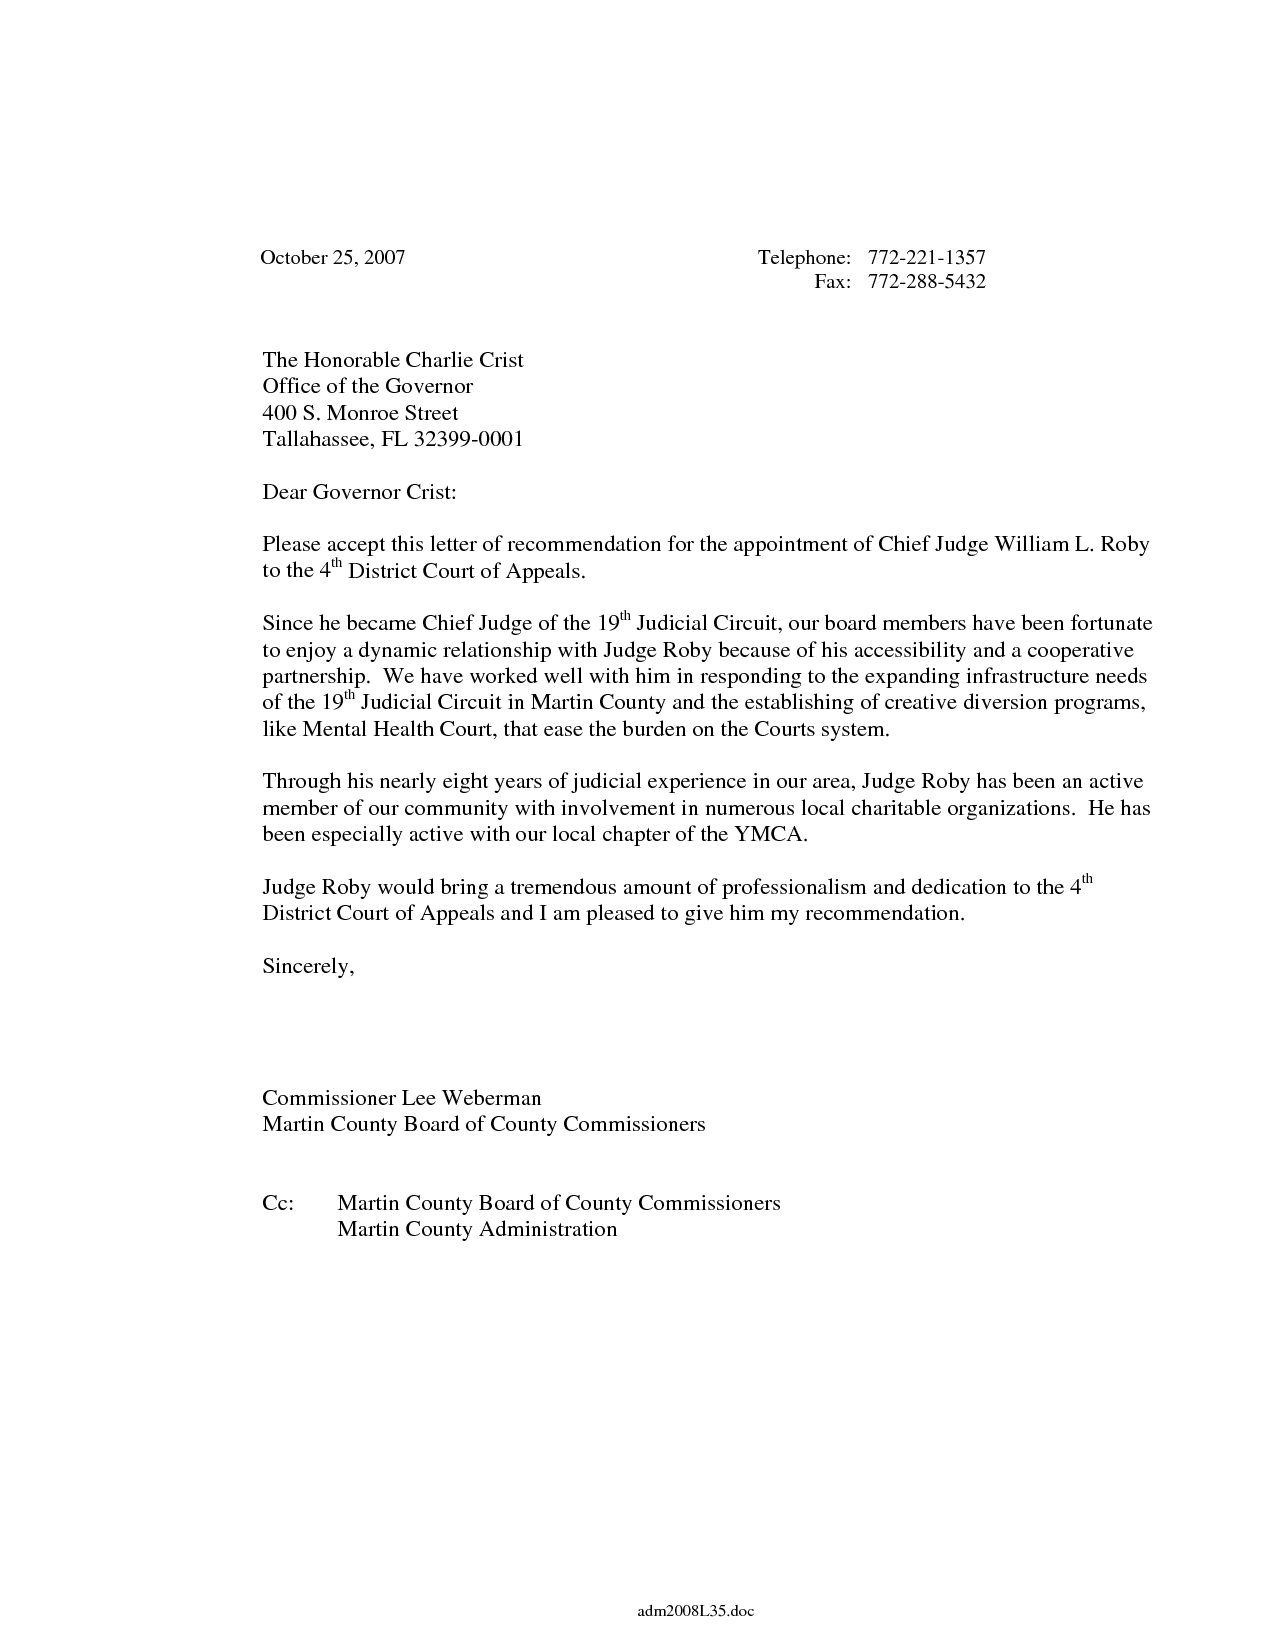 Recommendation Letter For Judge Akali intended for measurements 1275 X 1650